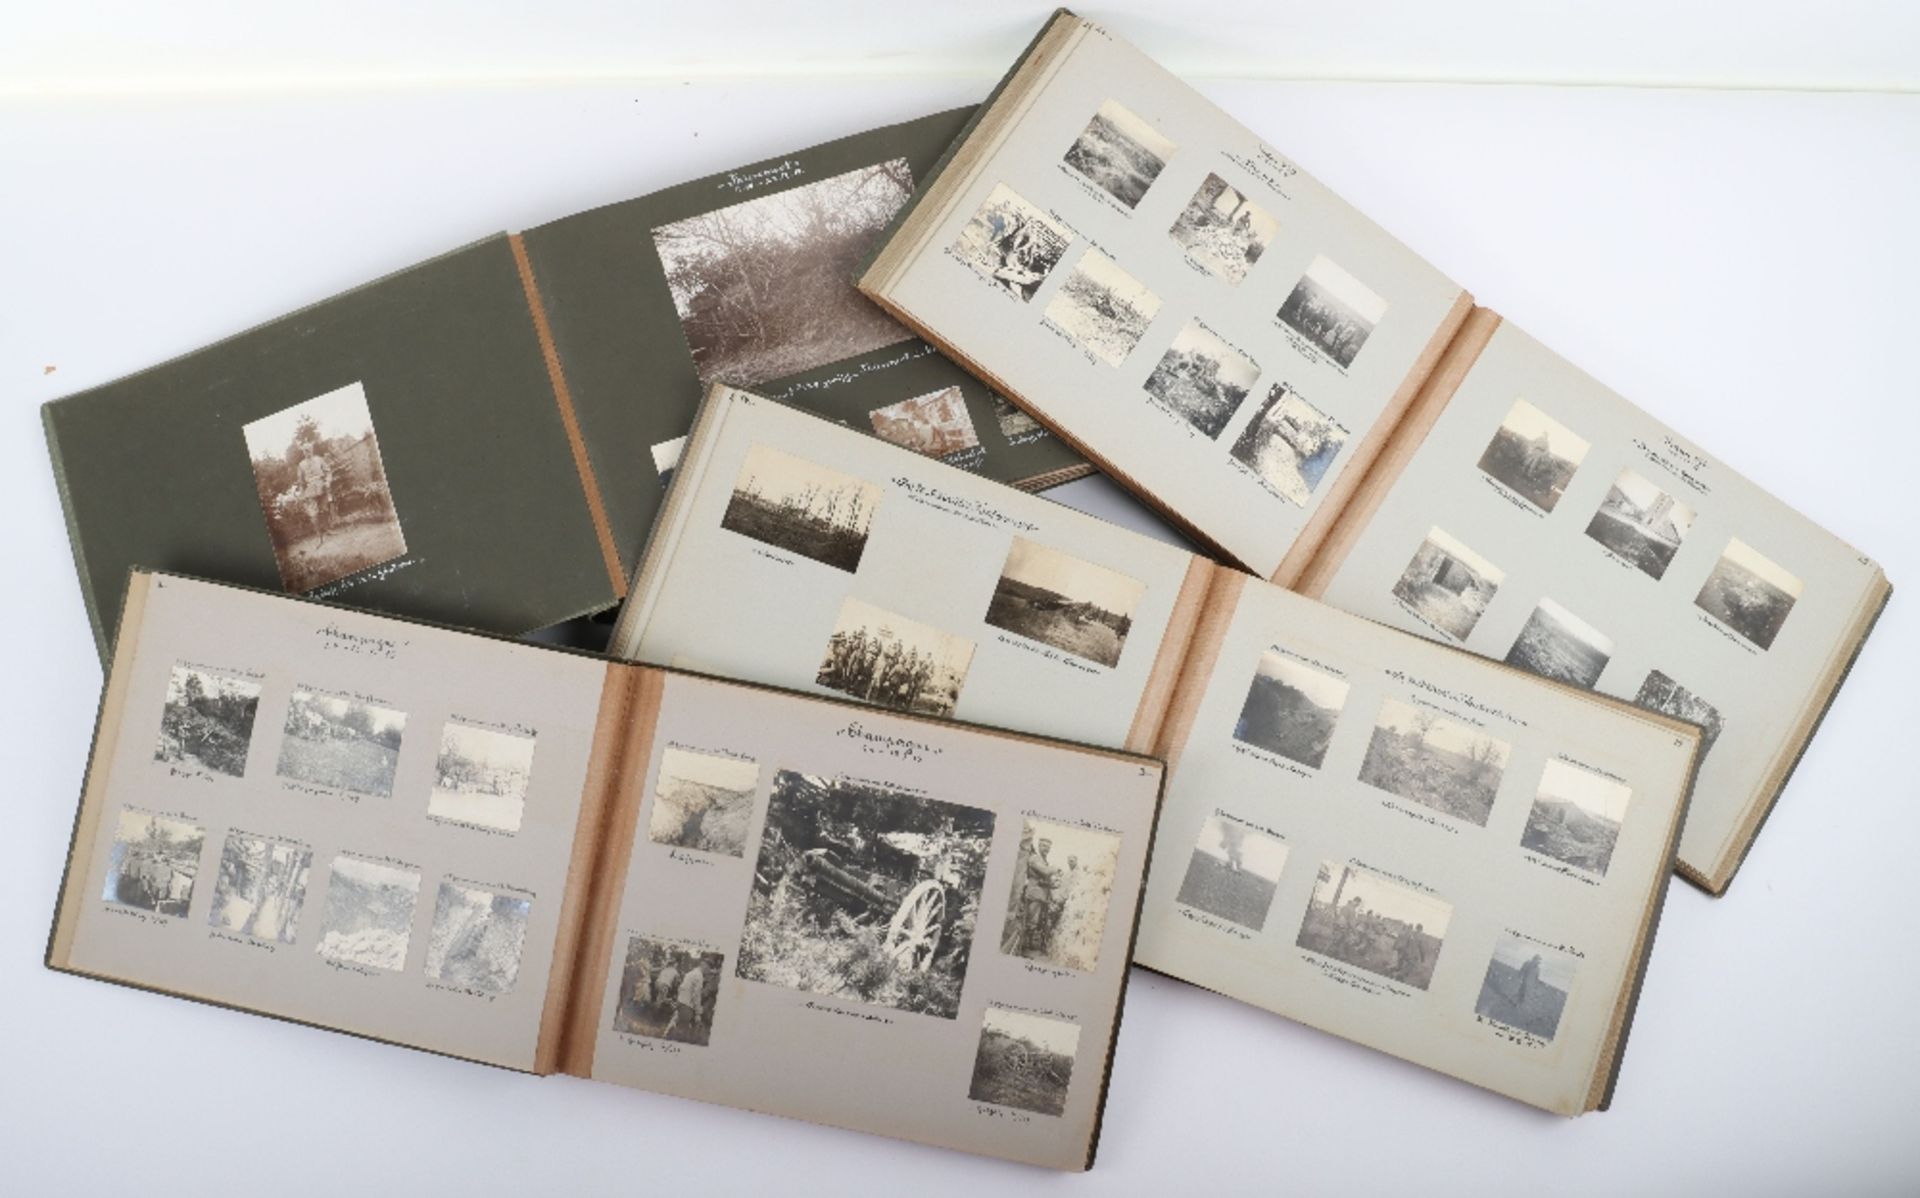 Substantial Collection of Photograph Albums, Medal Group, Award Documents and Uniform items to Major